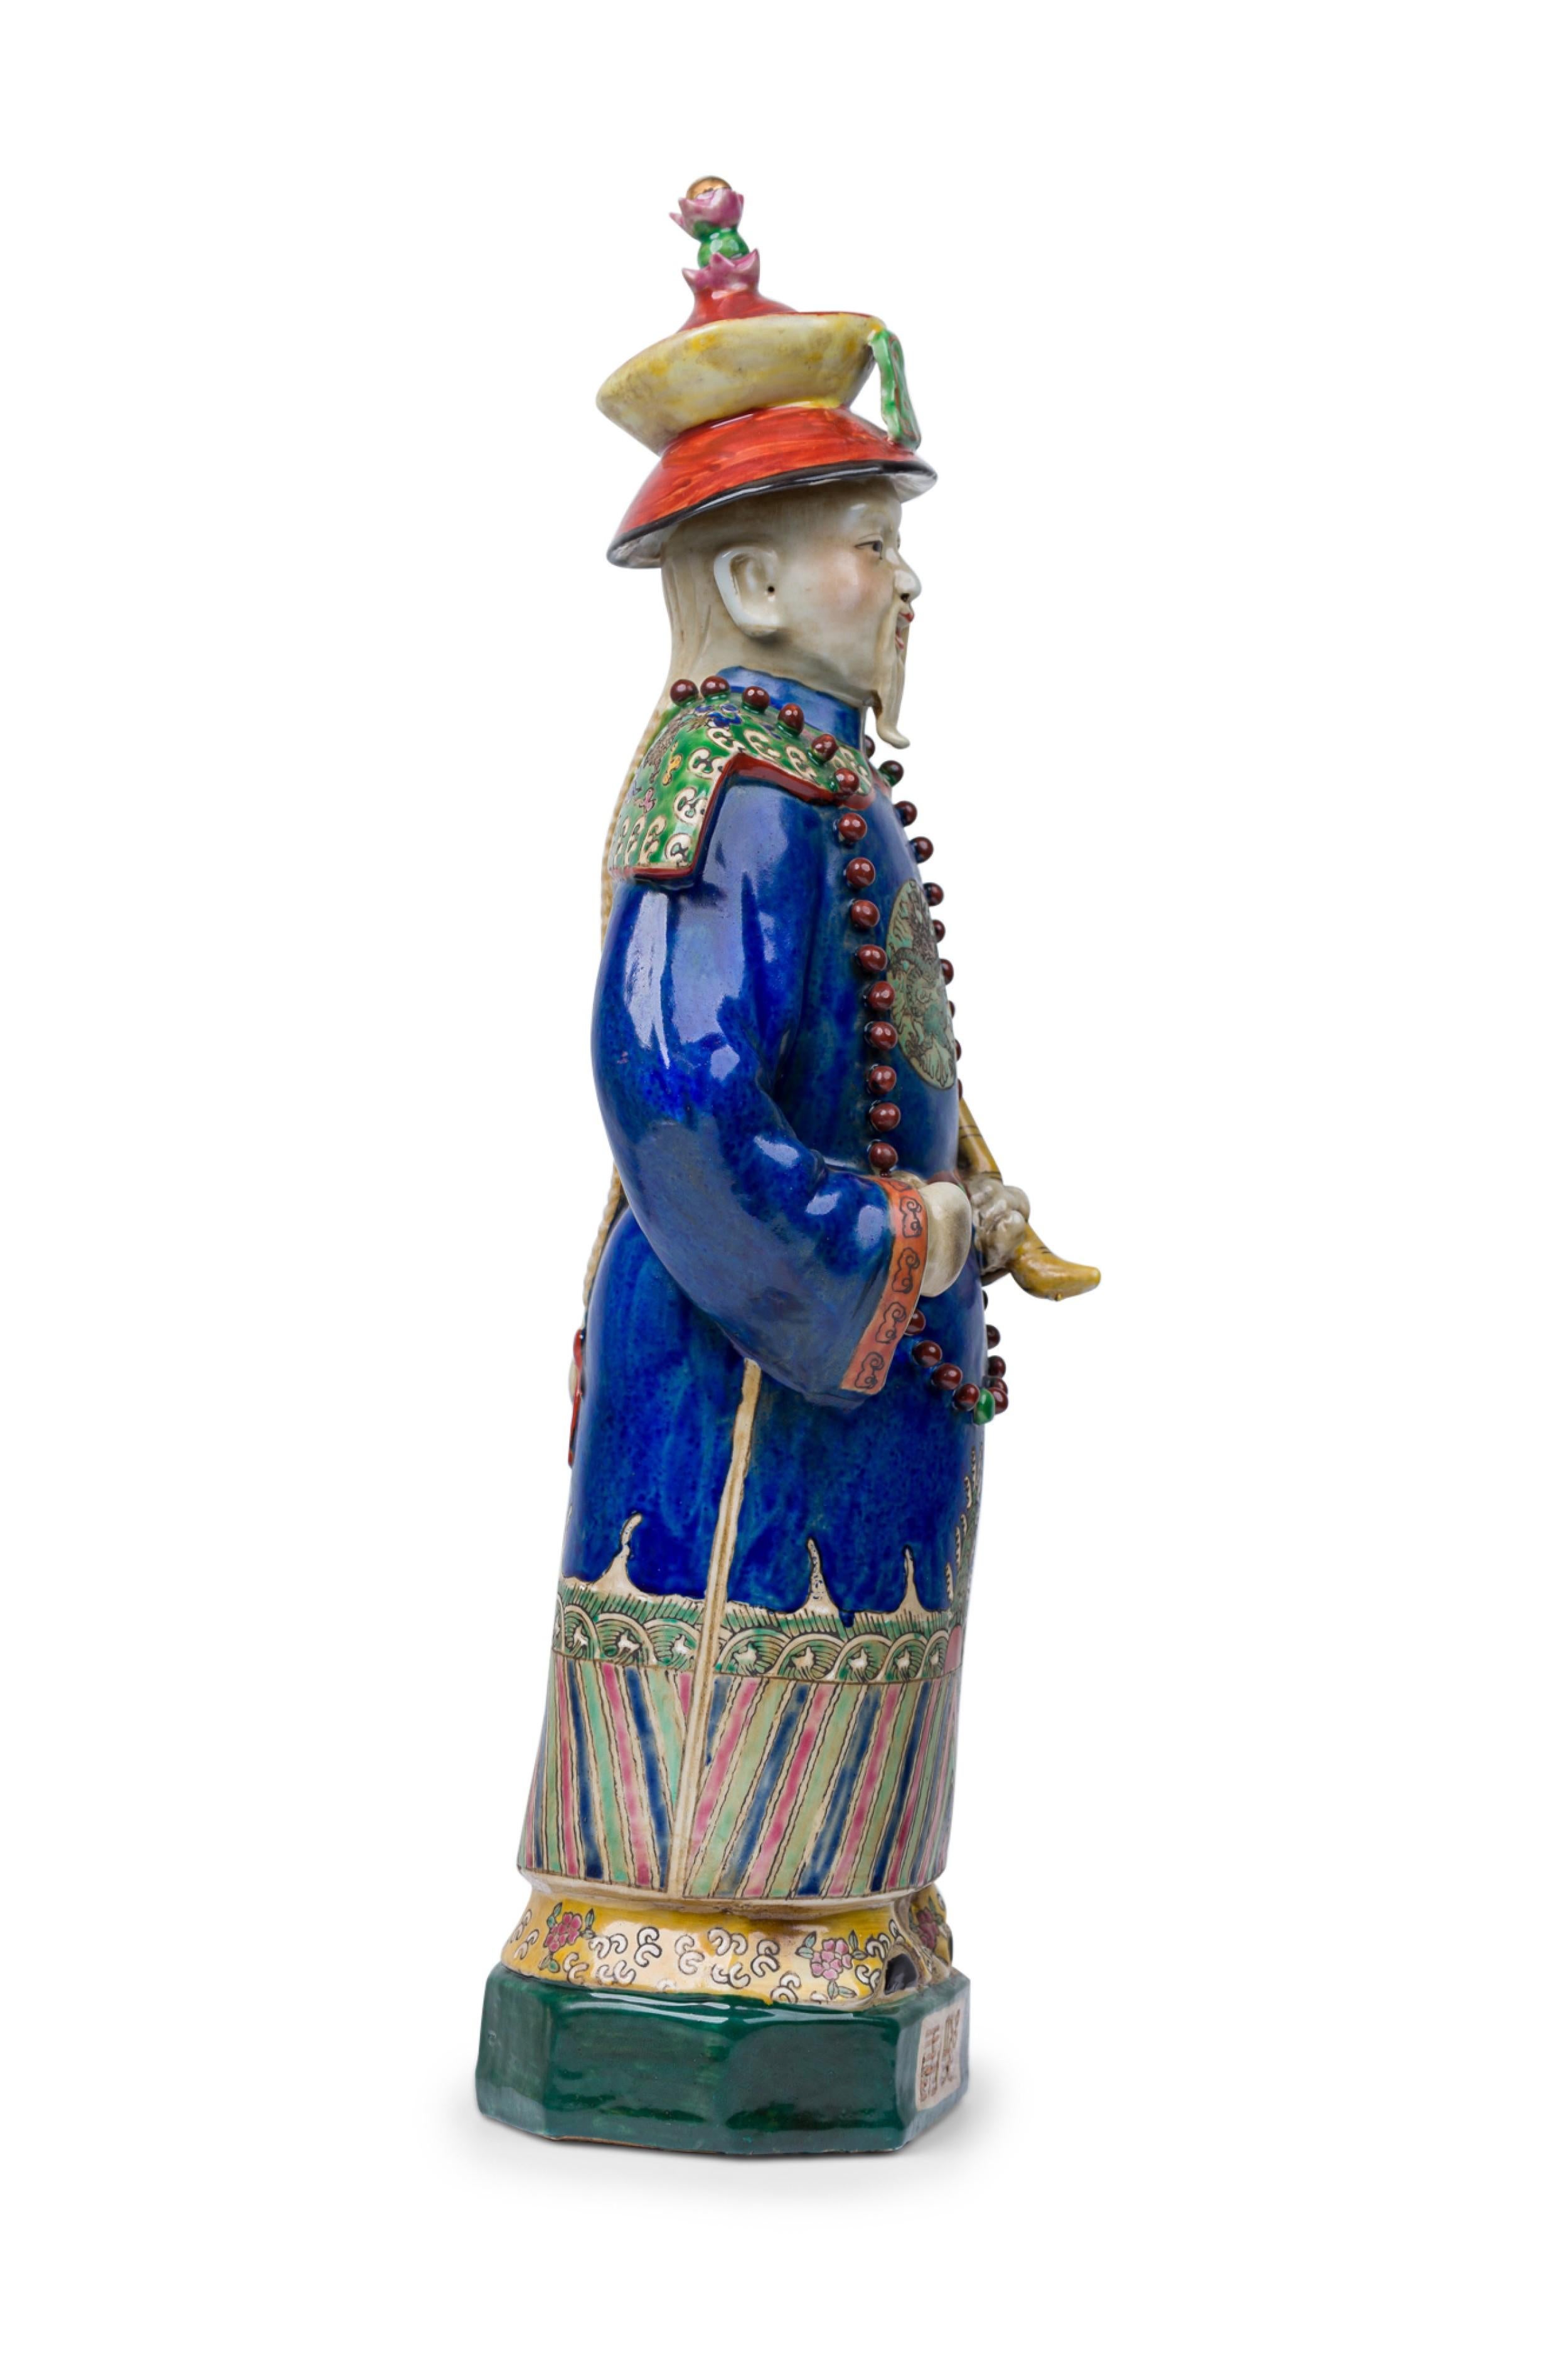 Pair of Chinese Painted Ceramic Figures Depicting a Blue Robed Emperor For Sale 11